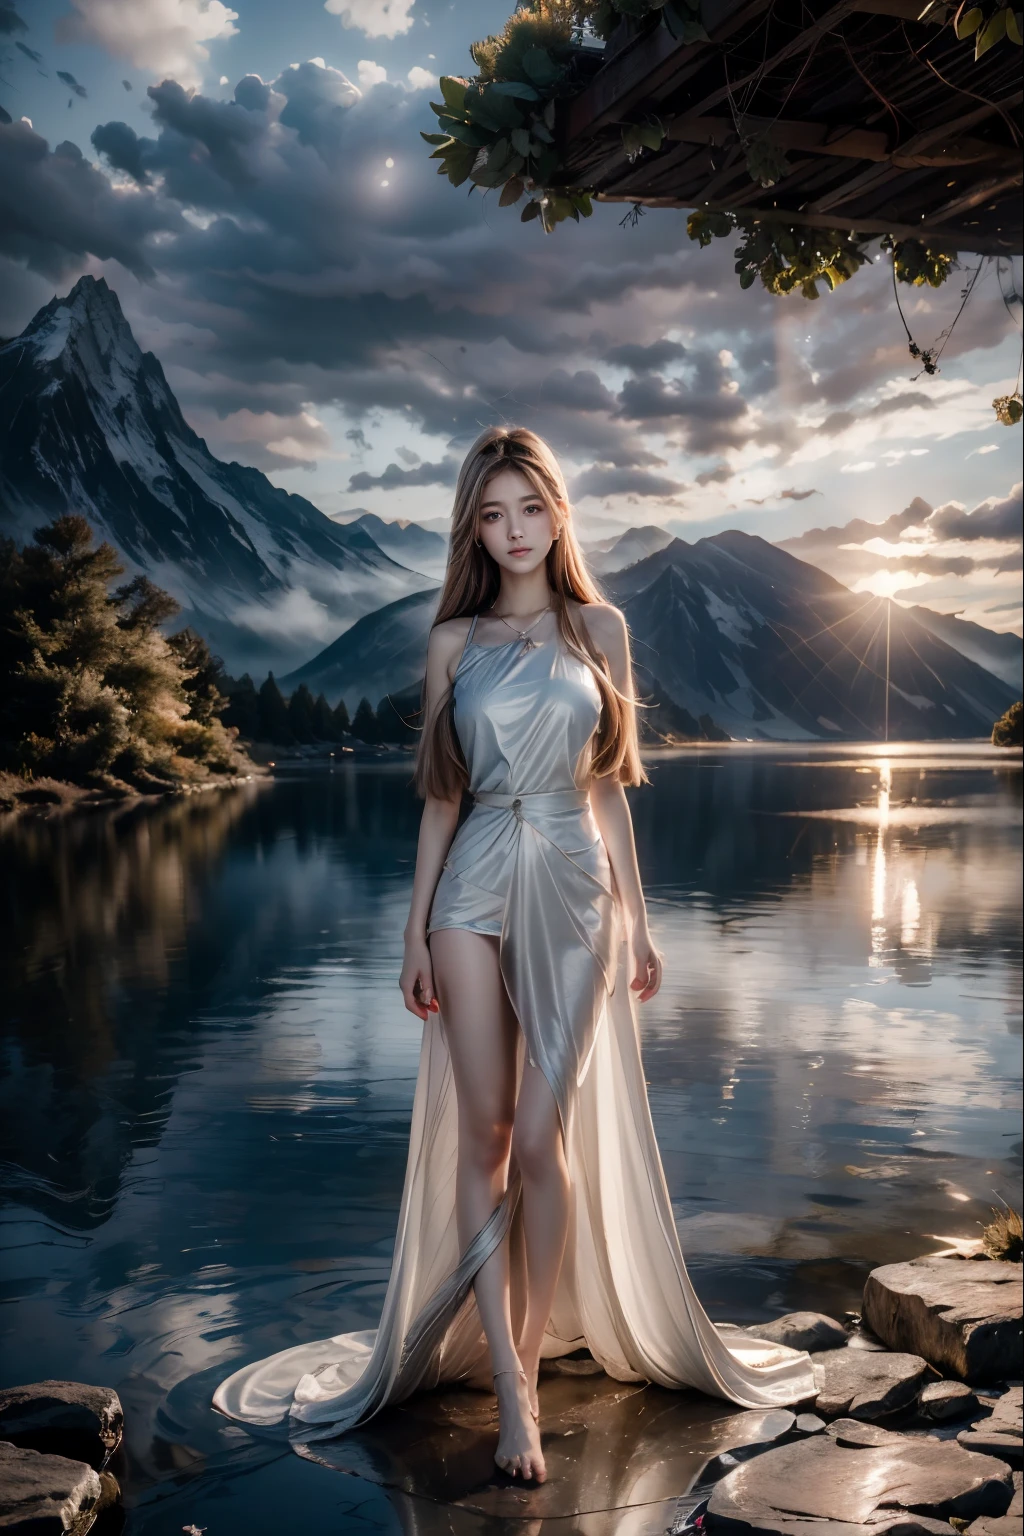 1 girl, with a calm expression, mesmerizing eyes, straight long hair, A flowing dress, A calm posture, porcelain skin, Subtle blush, Crystal pendantBREAK Golden Hour, (edge lit):1.2, a warm color palette, sunflare, soft shade, vivd colour, painterly effect, Dreamy atmosphereBREAK Scenic lake, Far Mountain, willowy, Calm water, Reflectors, clouds illuminated by sunlight, tranquil ambiance, Idyllic sunsets, ultra - detailed, offcial art, Unity8k wallpapers , Tangled, datura